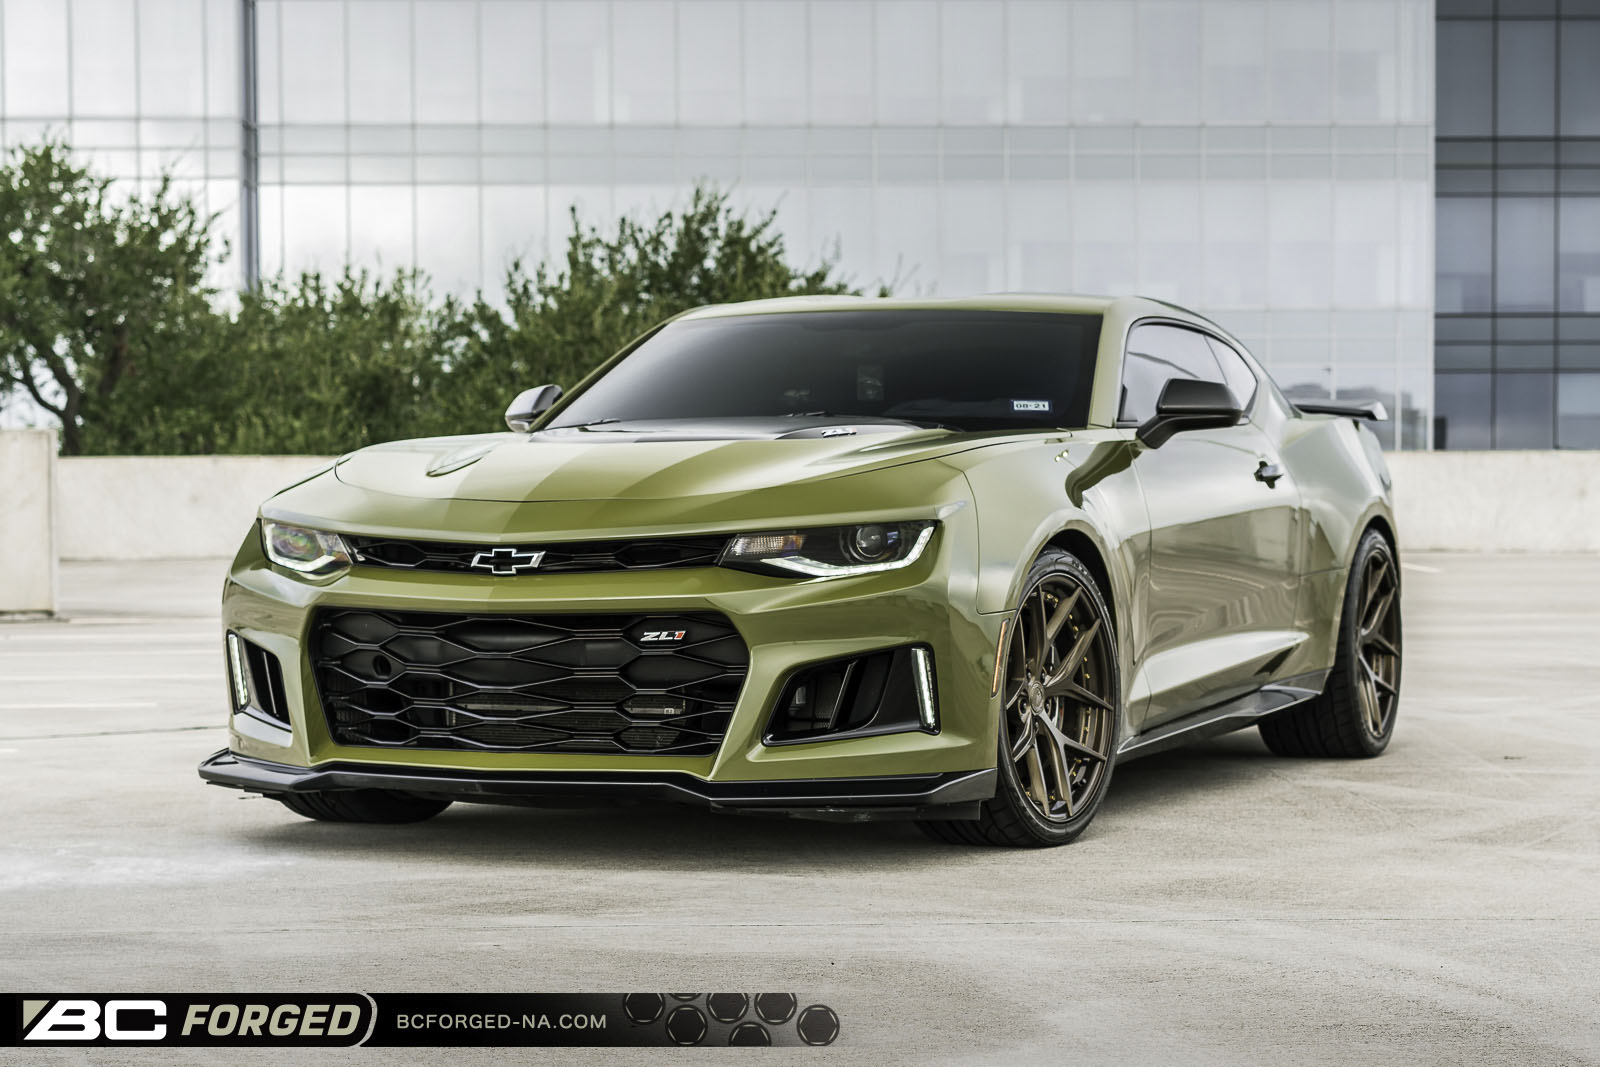 Chevrolet Camaro Zl1 6th Gen Army Green Bc Forged Hcs21s Wheel Front